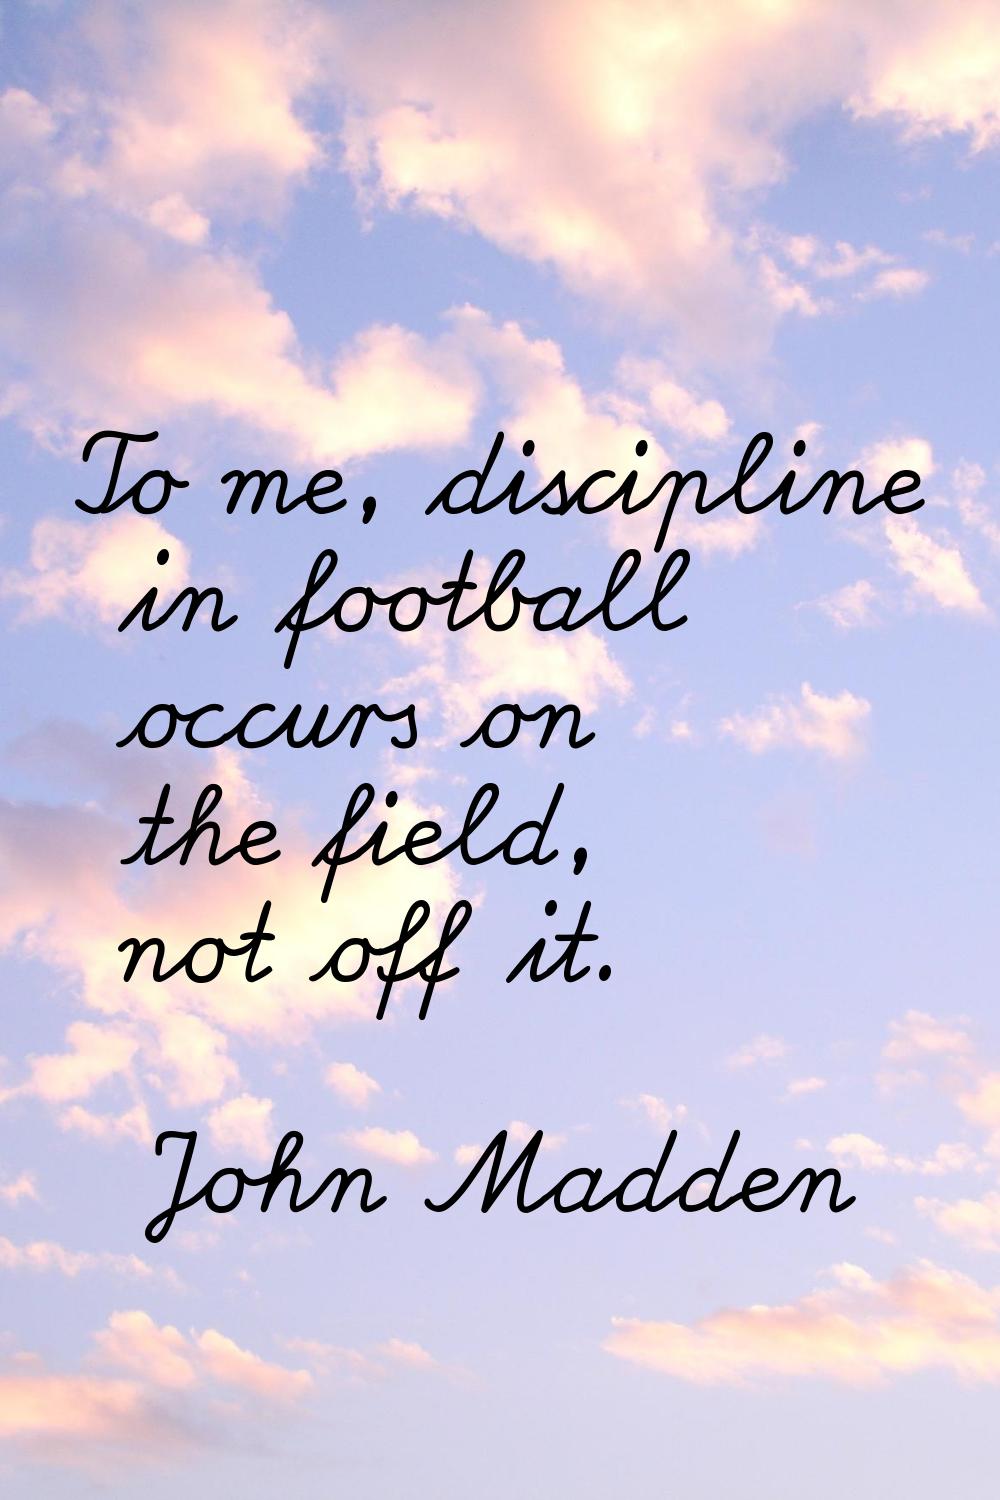 To me, discipline in football occurs on the field, not off it.